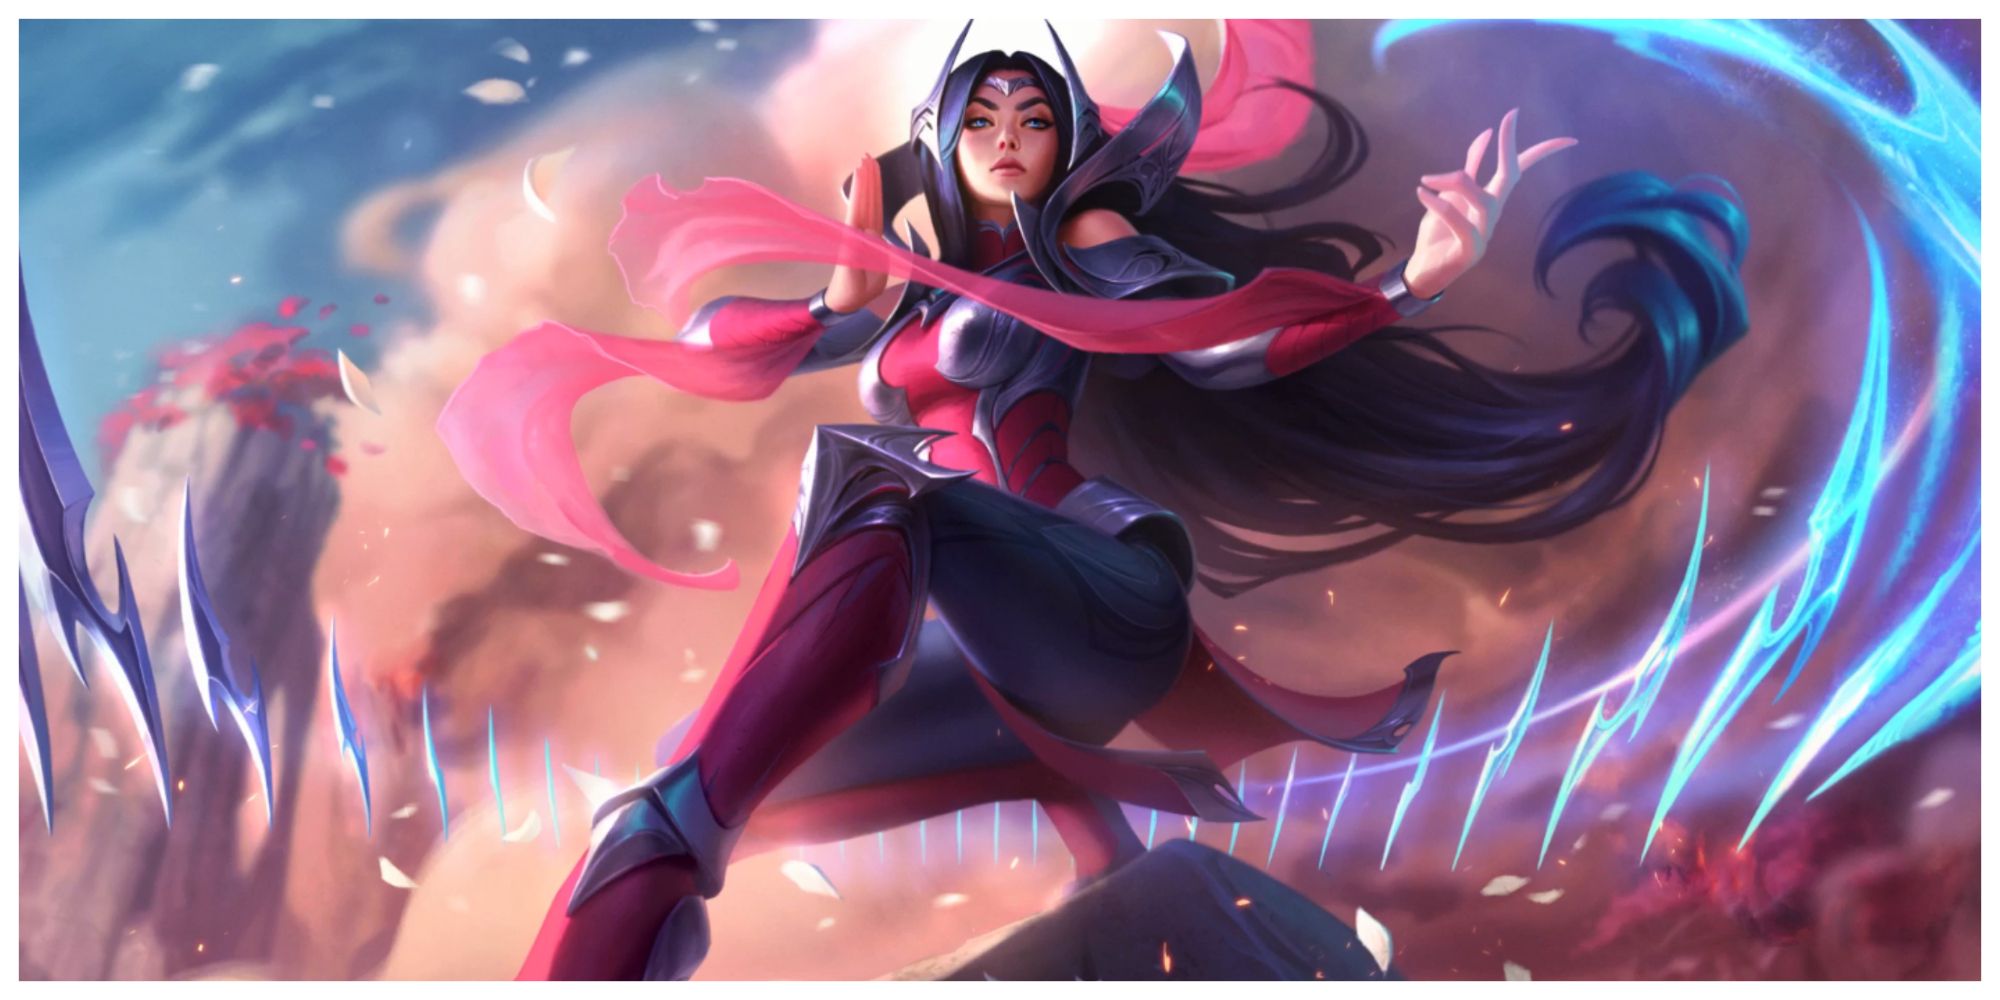 Irelia The Blade Dancer sitting perched atop a hill, the breeze blowing petals around her as her blades dance around her